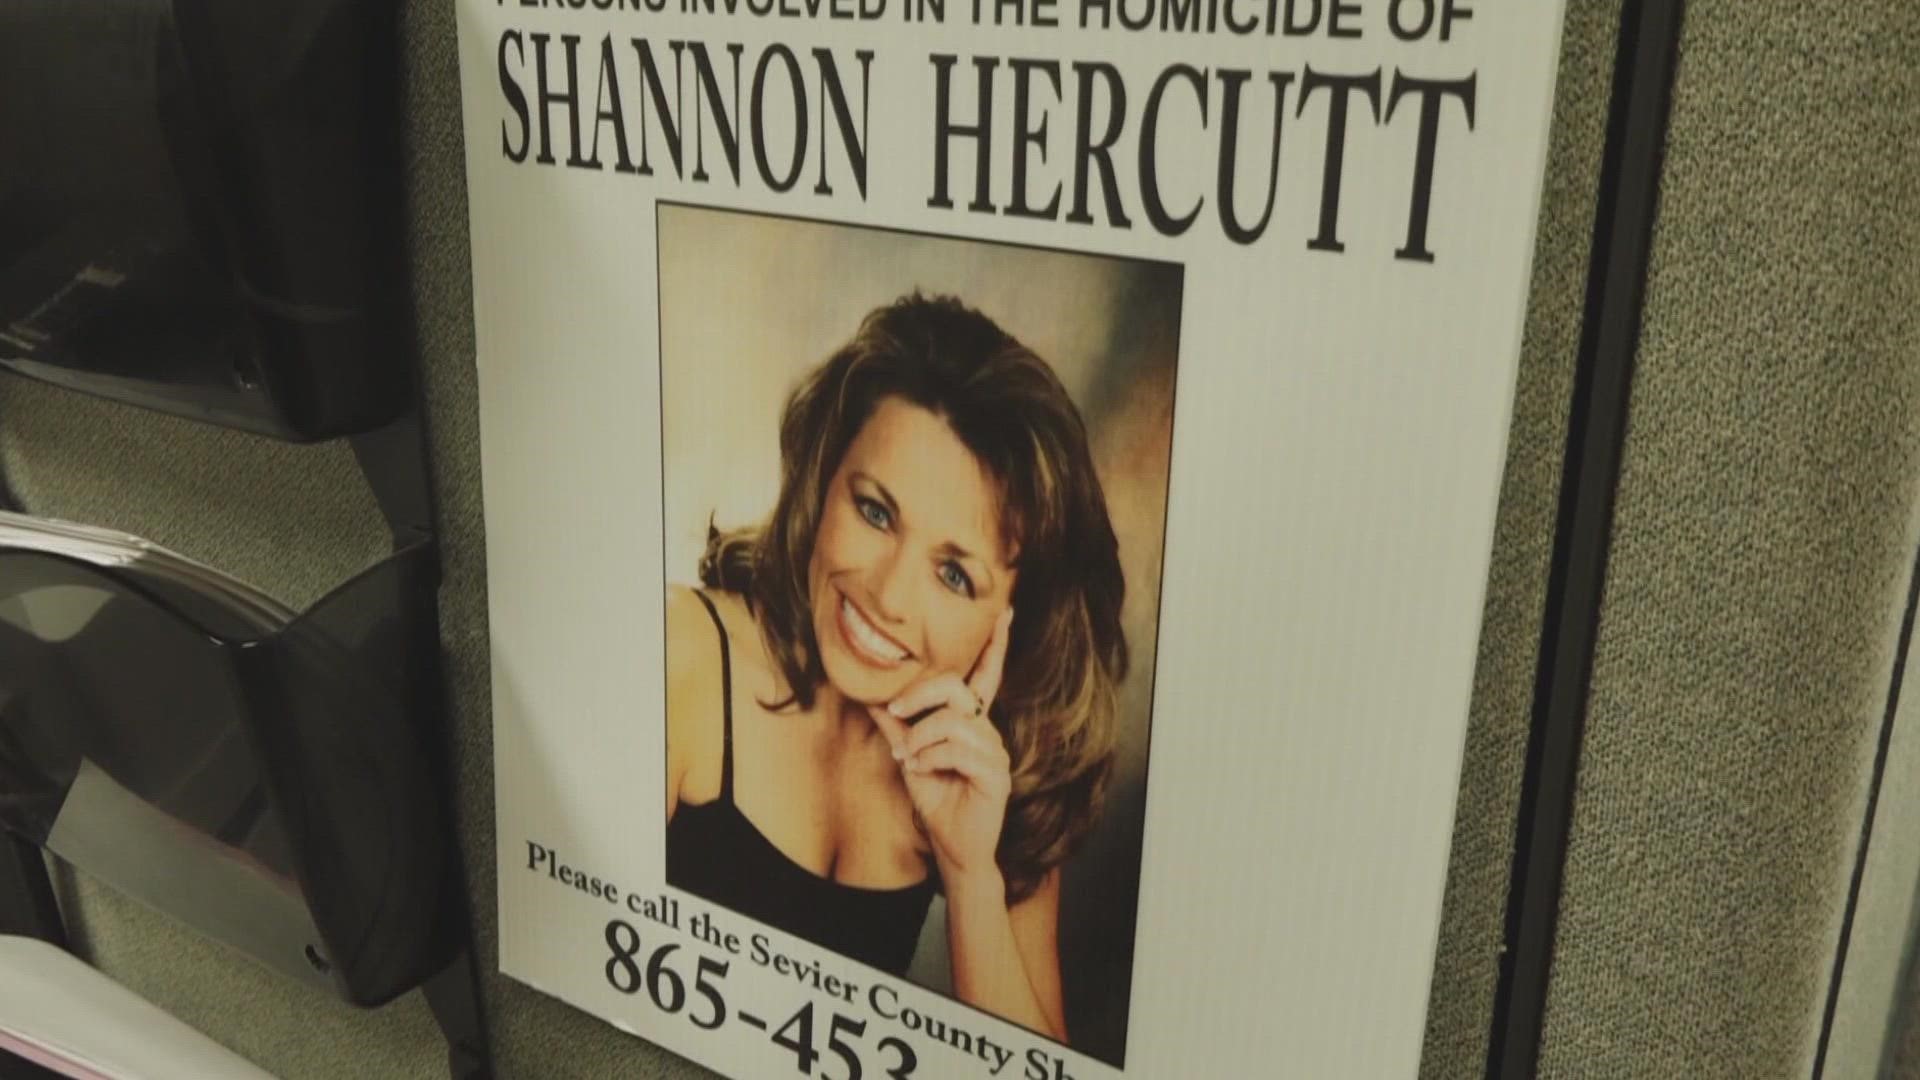 Investigators still have no suspects in the death of Shannon Hercutt. The successful business woman was found murdered in a staged car accident in 2009.